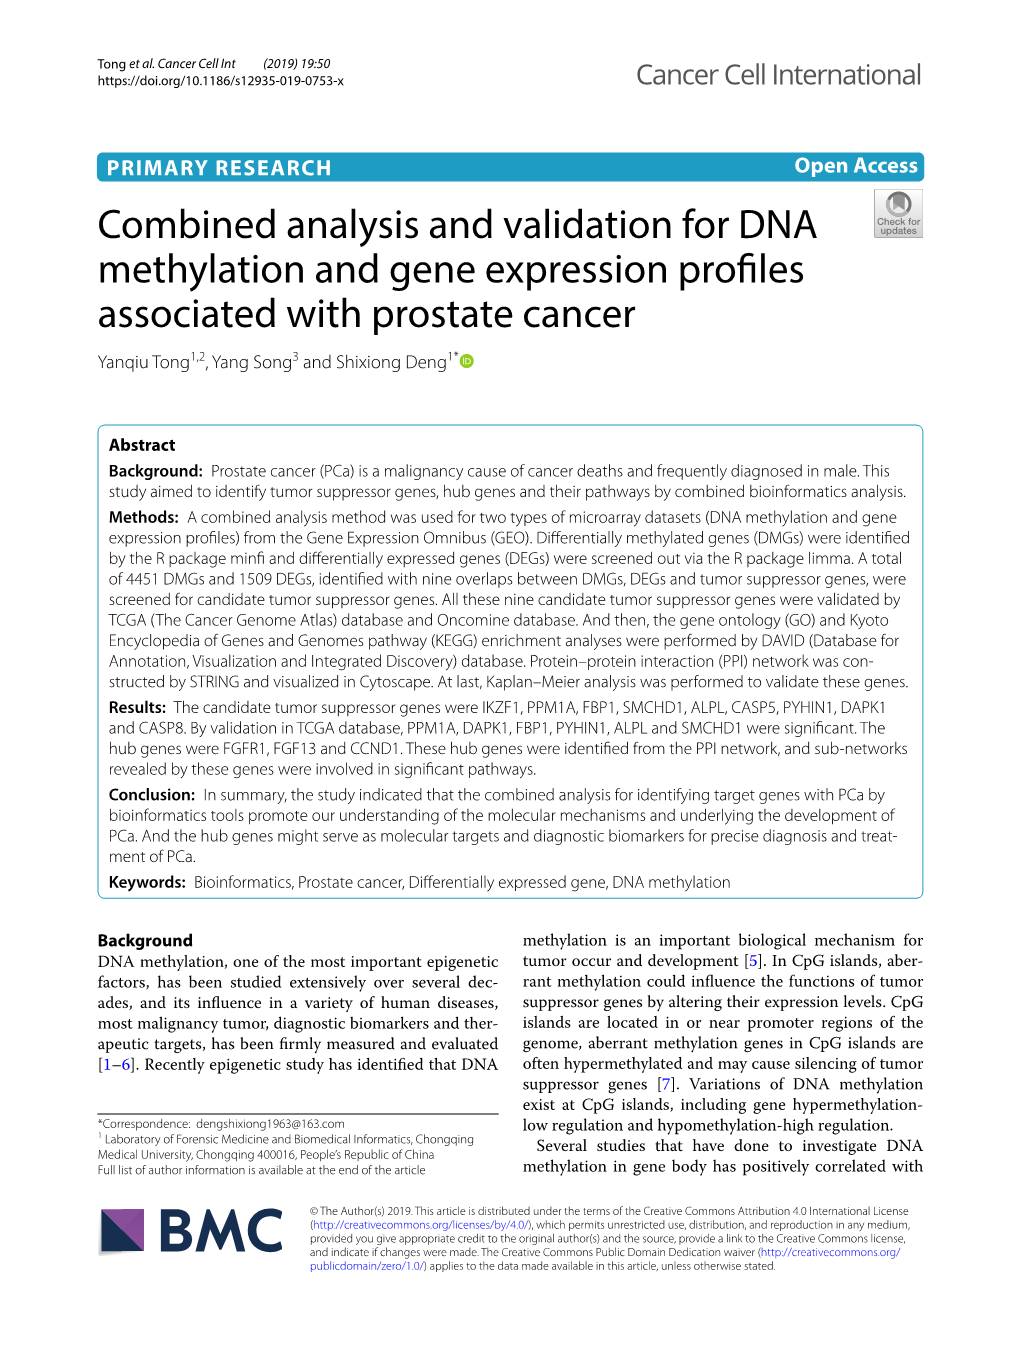 Combined Analysis and Validation for DNA Methylation and Gene Expression Profles Associated with Prostate Cancer Yanqiu Tong1,2, Yang Song3 and Shixiong Deng1*